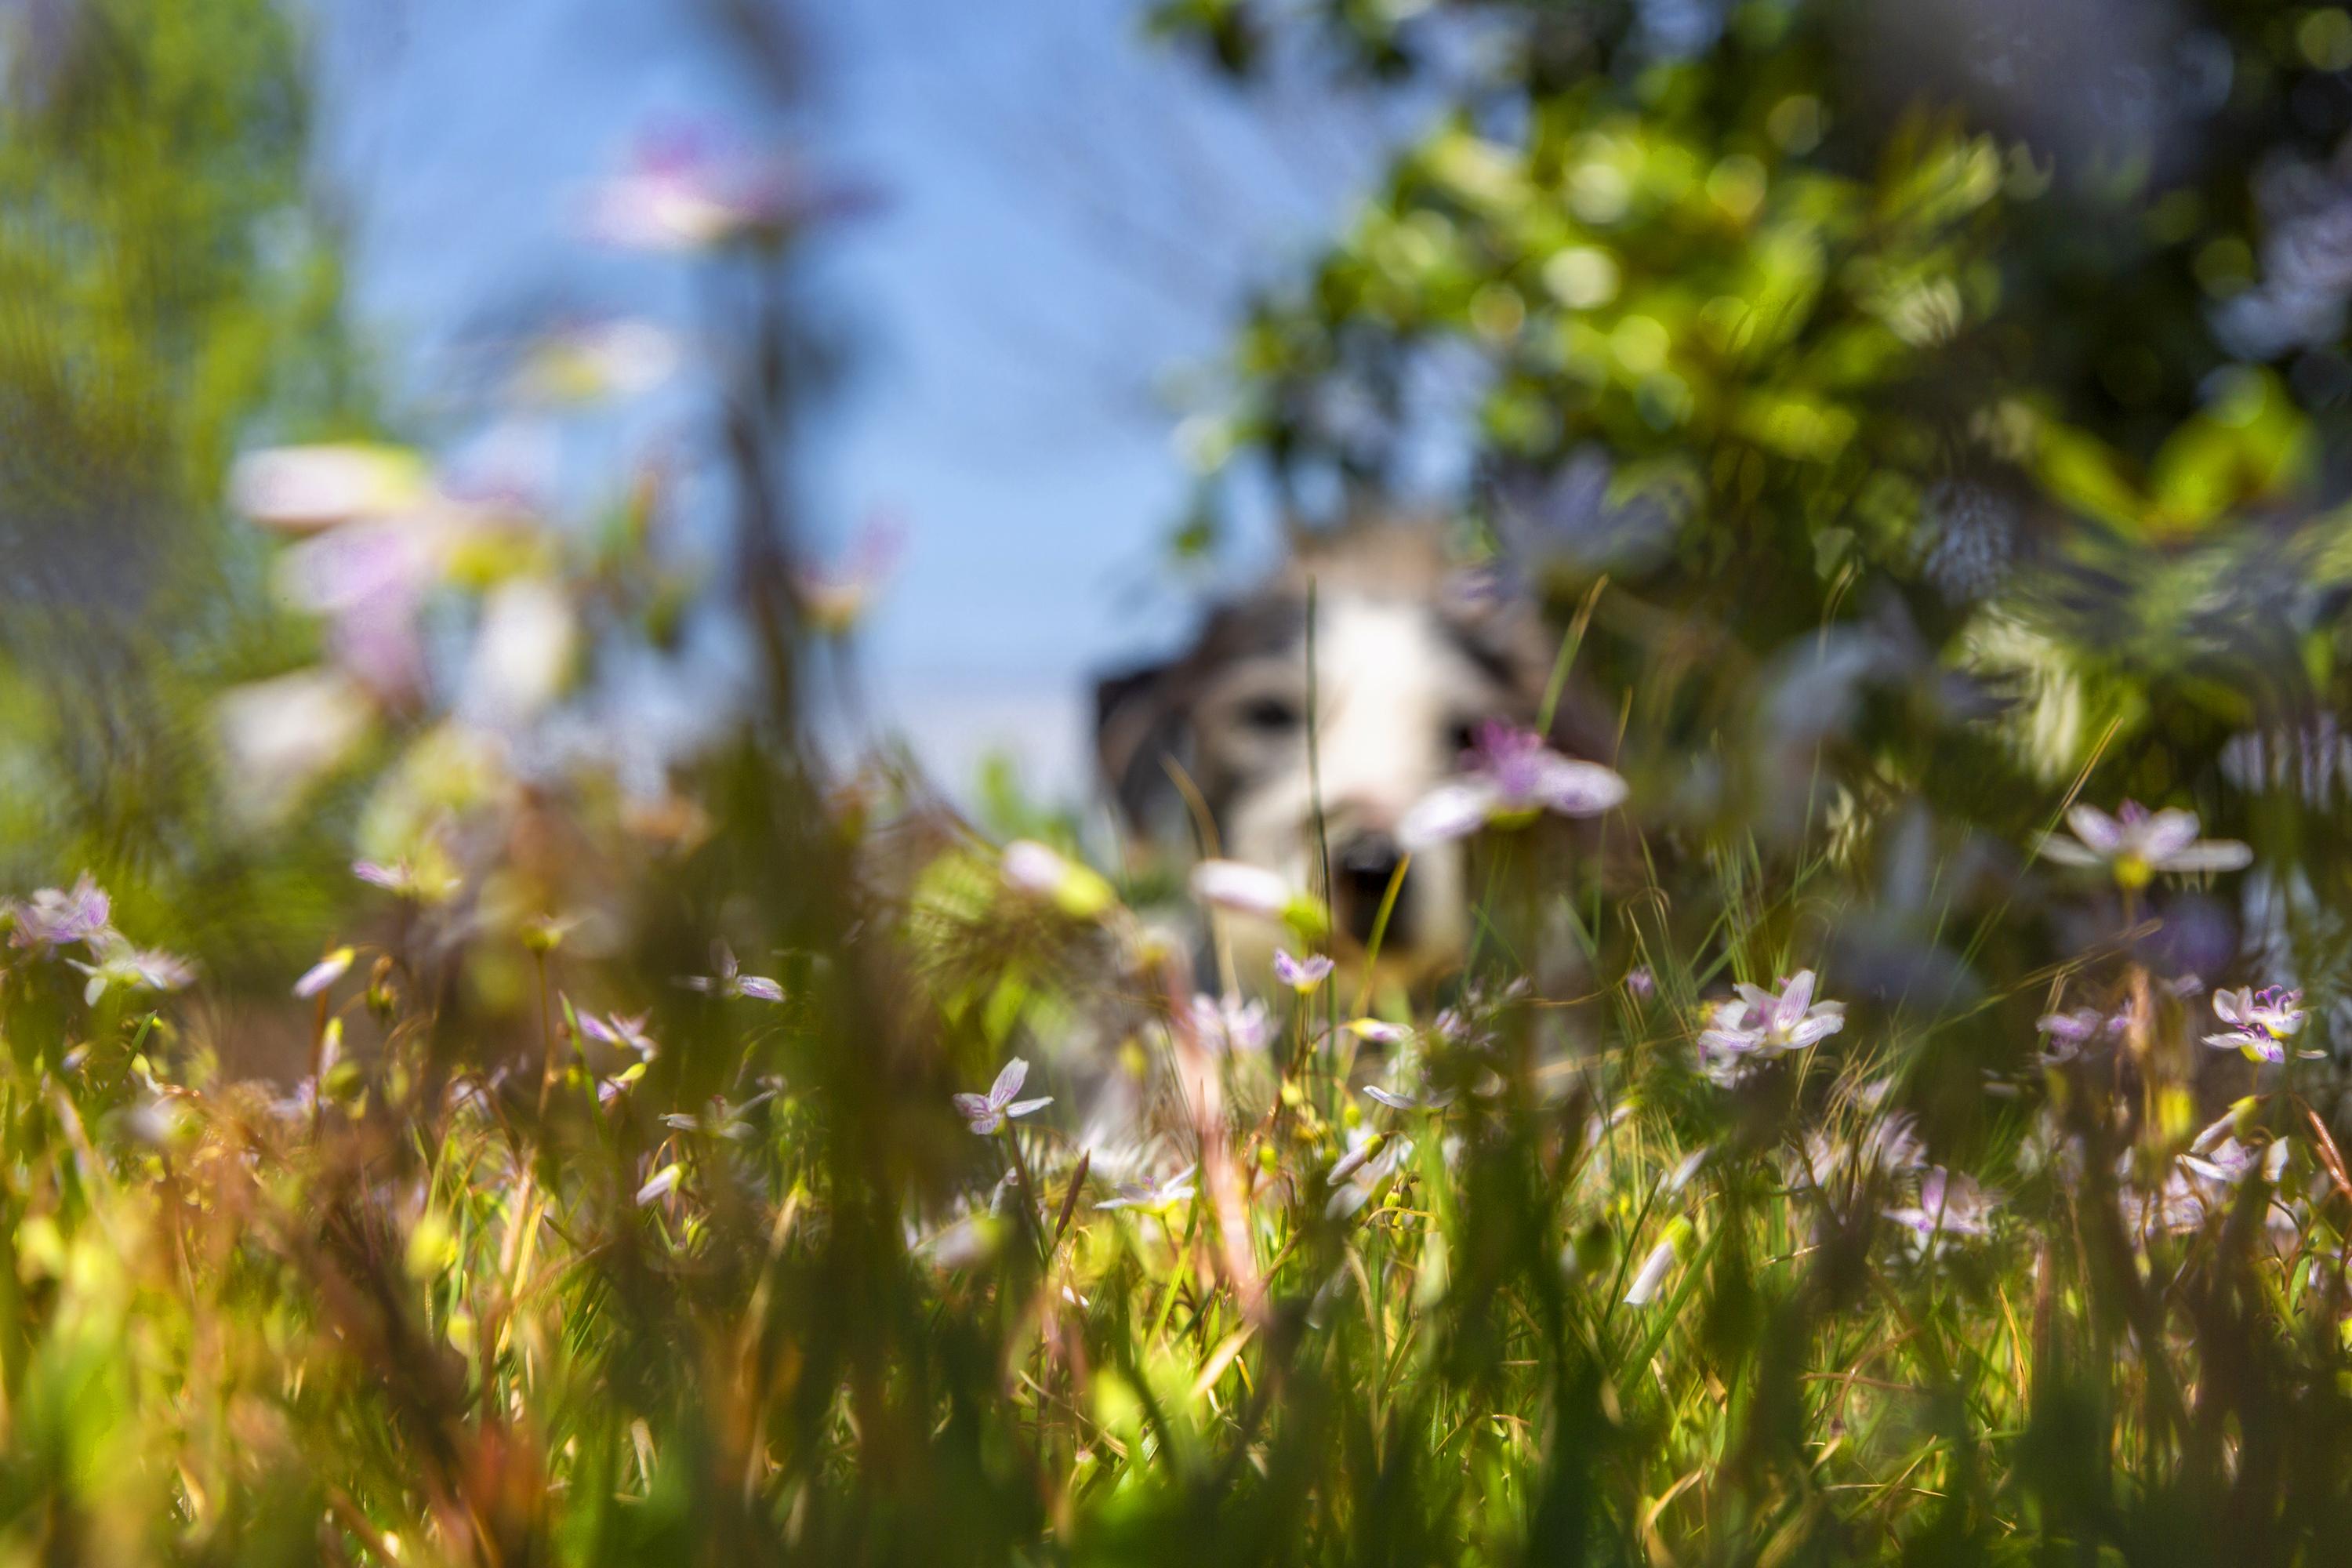 Thad Lee Landscape Photograph - 'Buddy in the Spring Beauties' - abstract landscape photography, colorful, dog